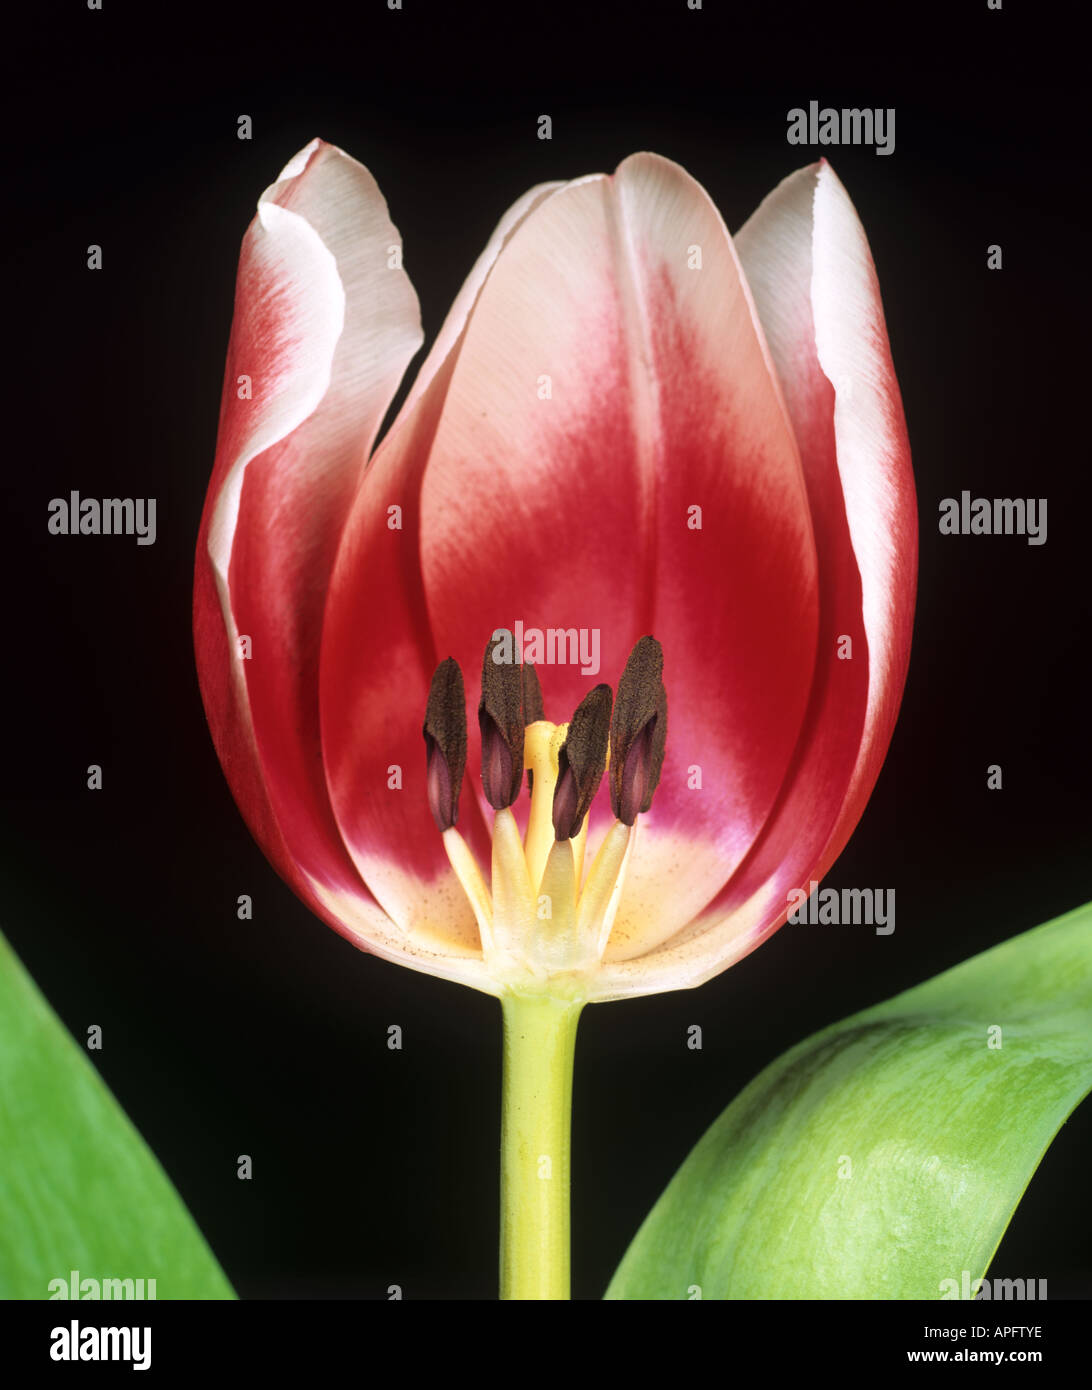 Section through the flower of a tulip variety Lustige Witwe to show flower parts Stock Photo